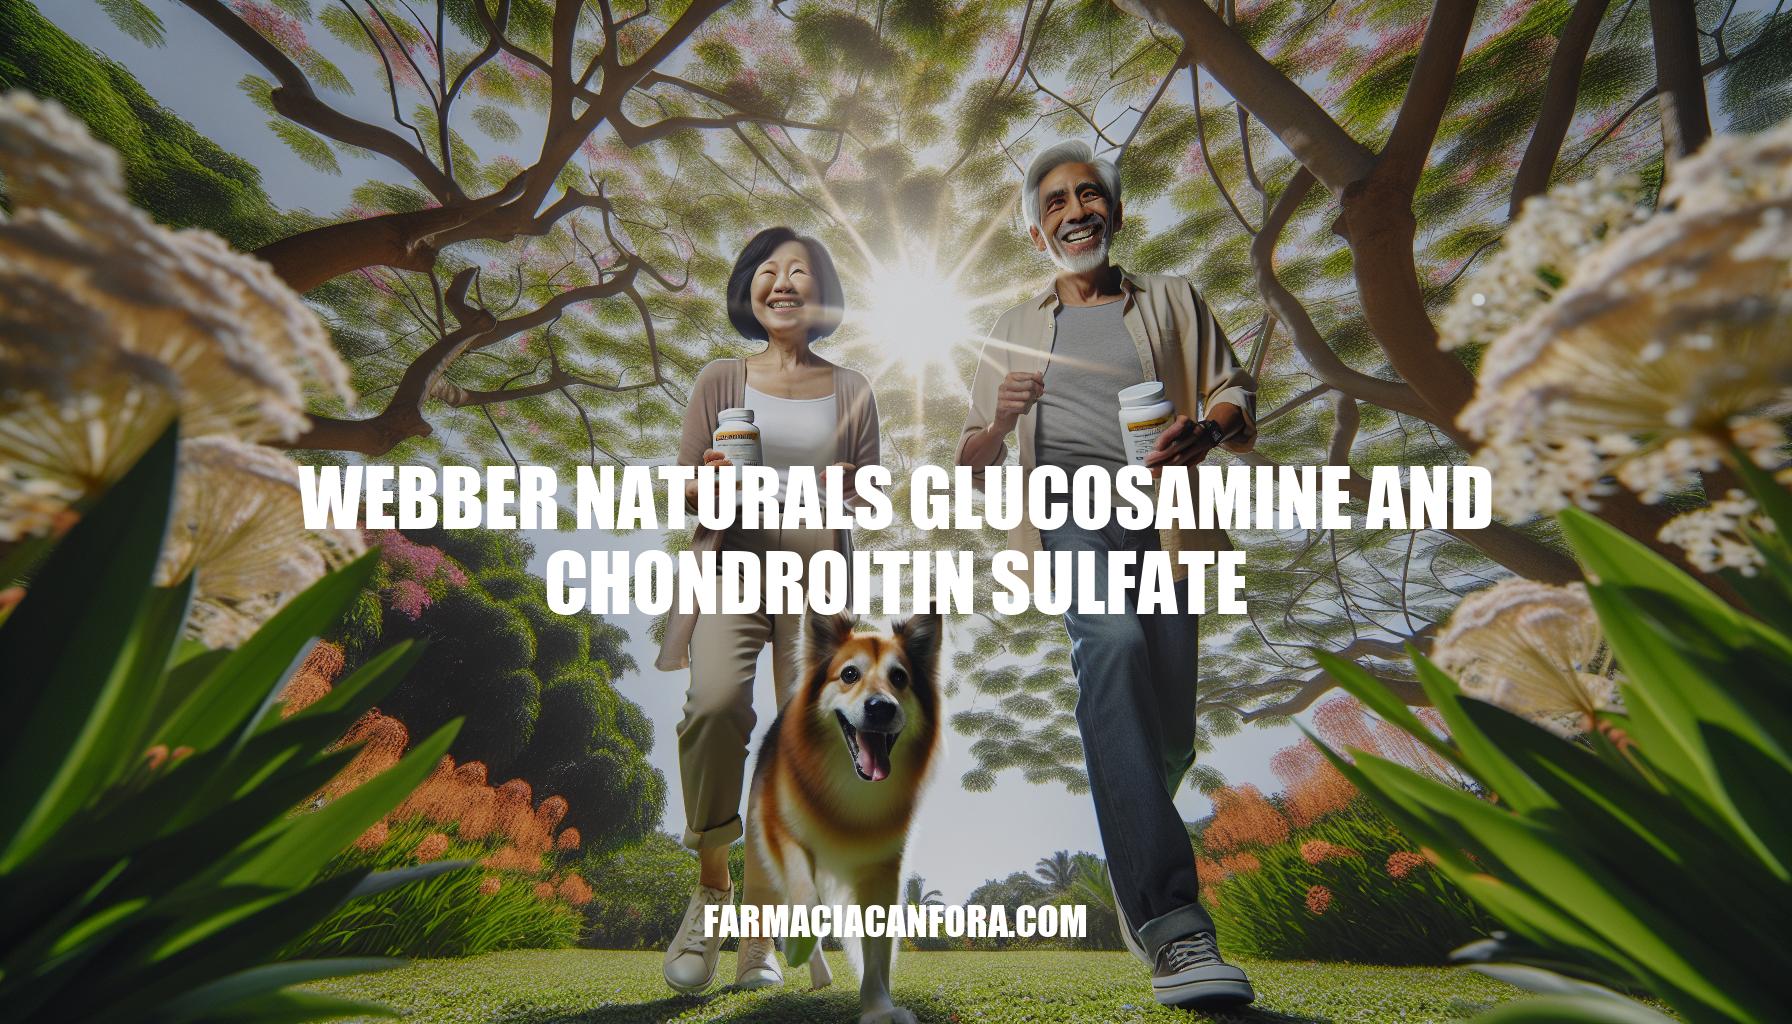 Benefits of Webber Naturals Glucosamine and Chondroitin Sulfate